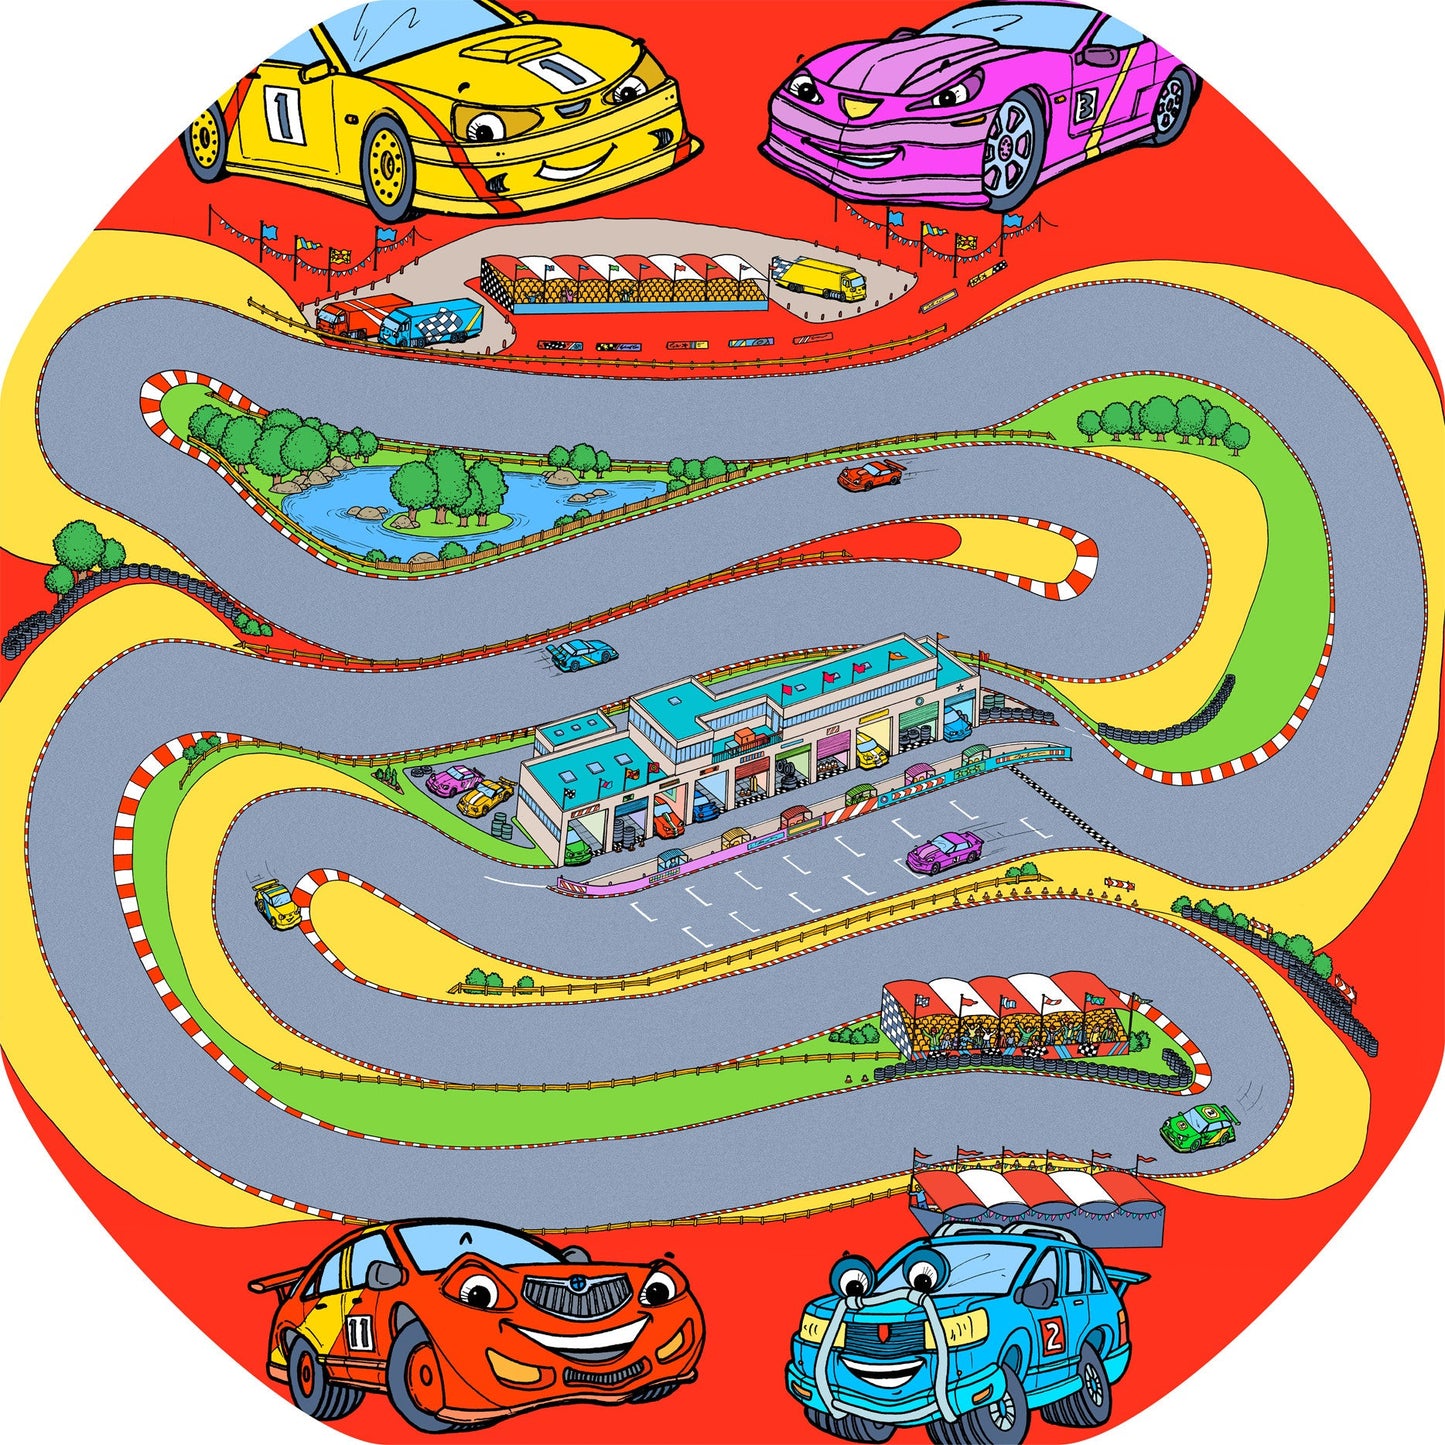 The Racing Car tuff tray mat features a winding race track with sports cars and pit stops. Perfect for individual racing or small group imaginative play. Designed to fit in the Tuff Tray or the Tuff Spot.